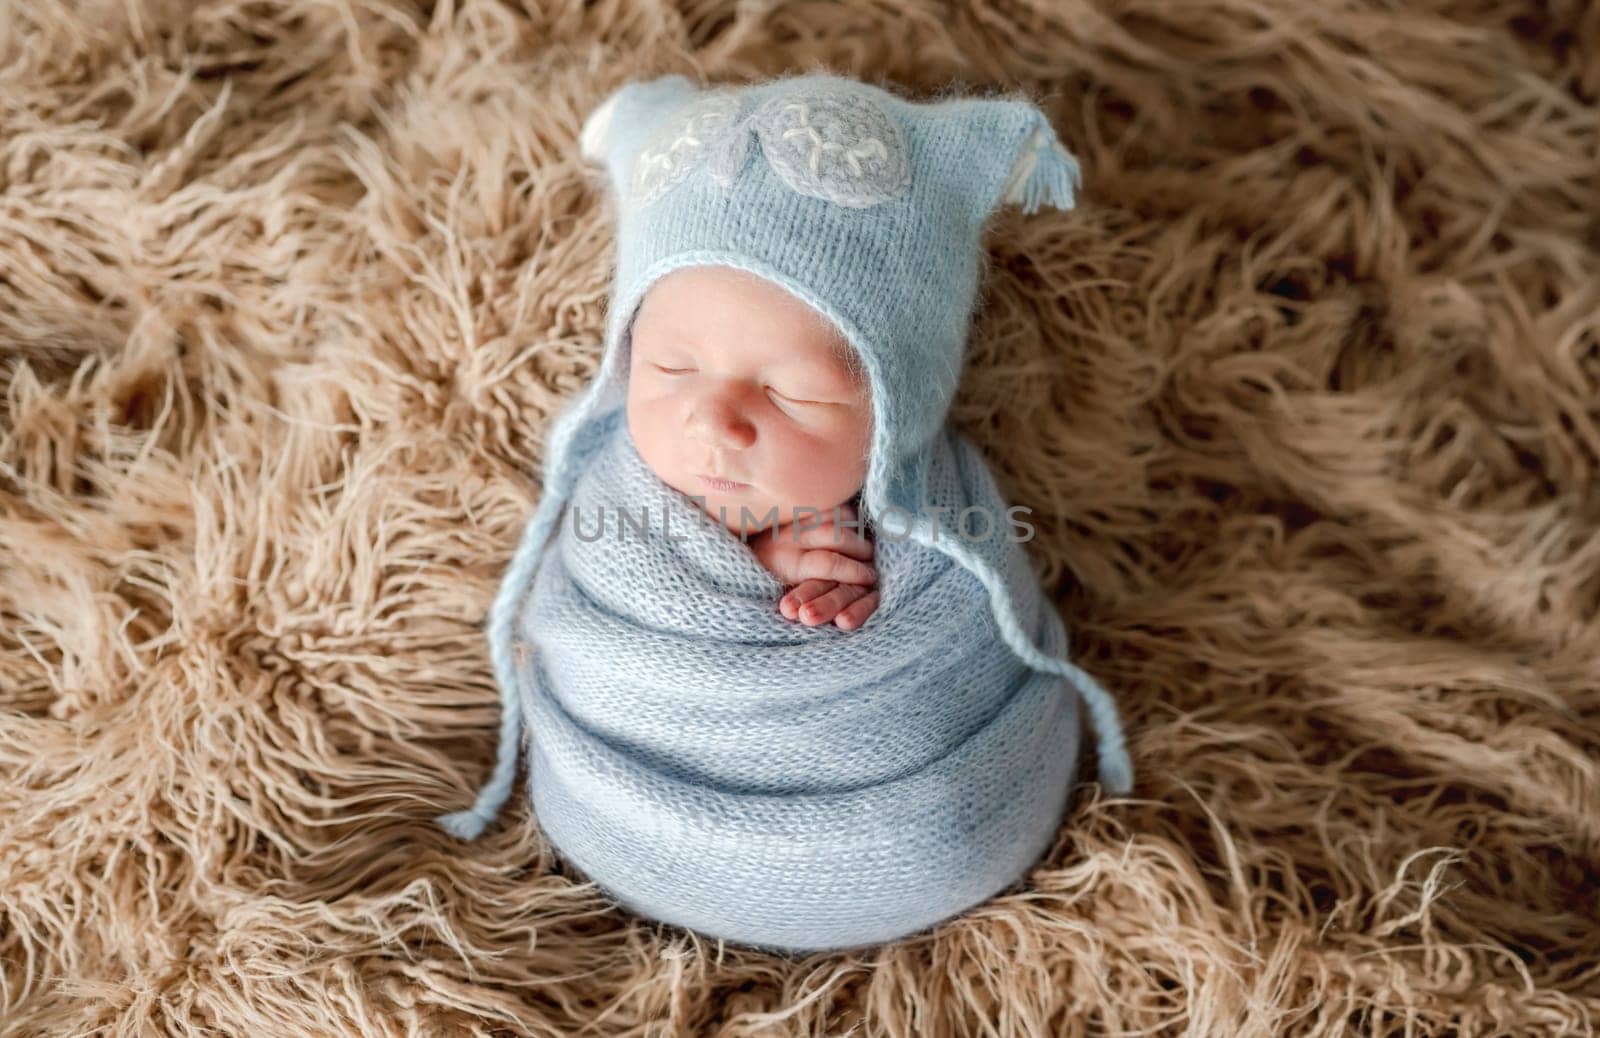 Adorable newborn baby boy swaddled in knitted blanket and wearing hat on fur studio portrait. Cute infant child kid sleeping